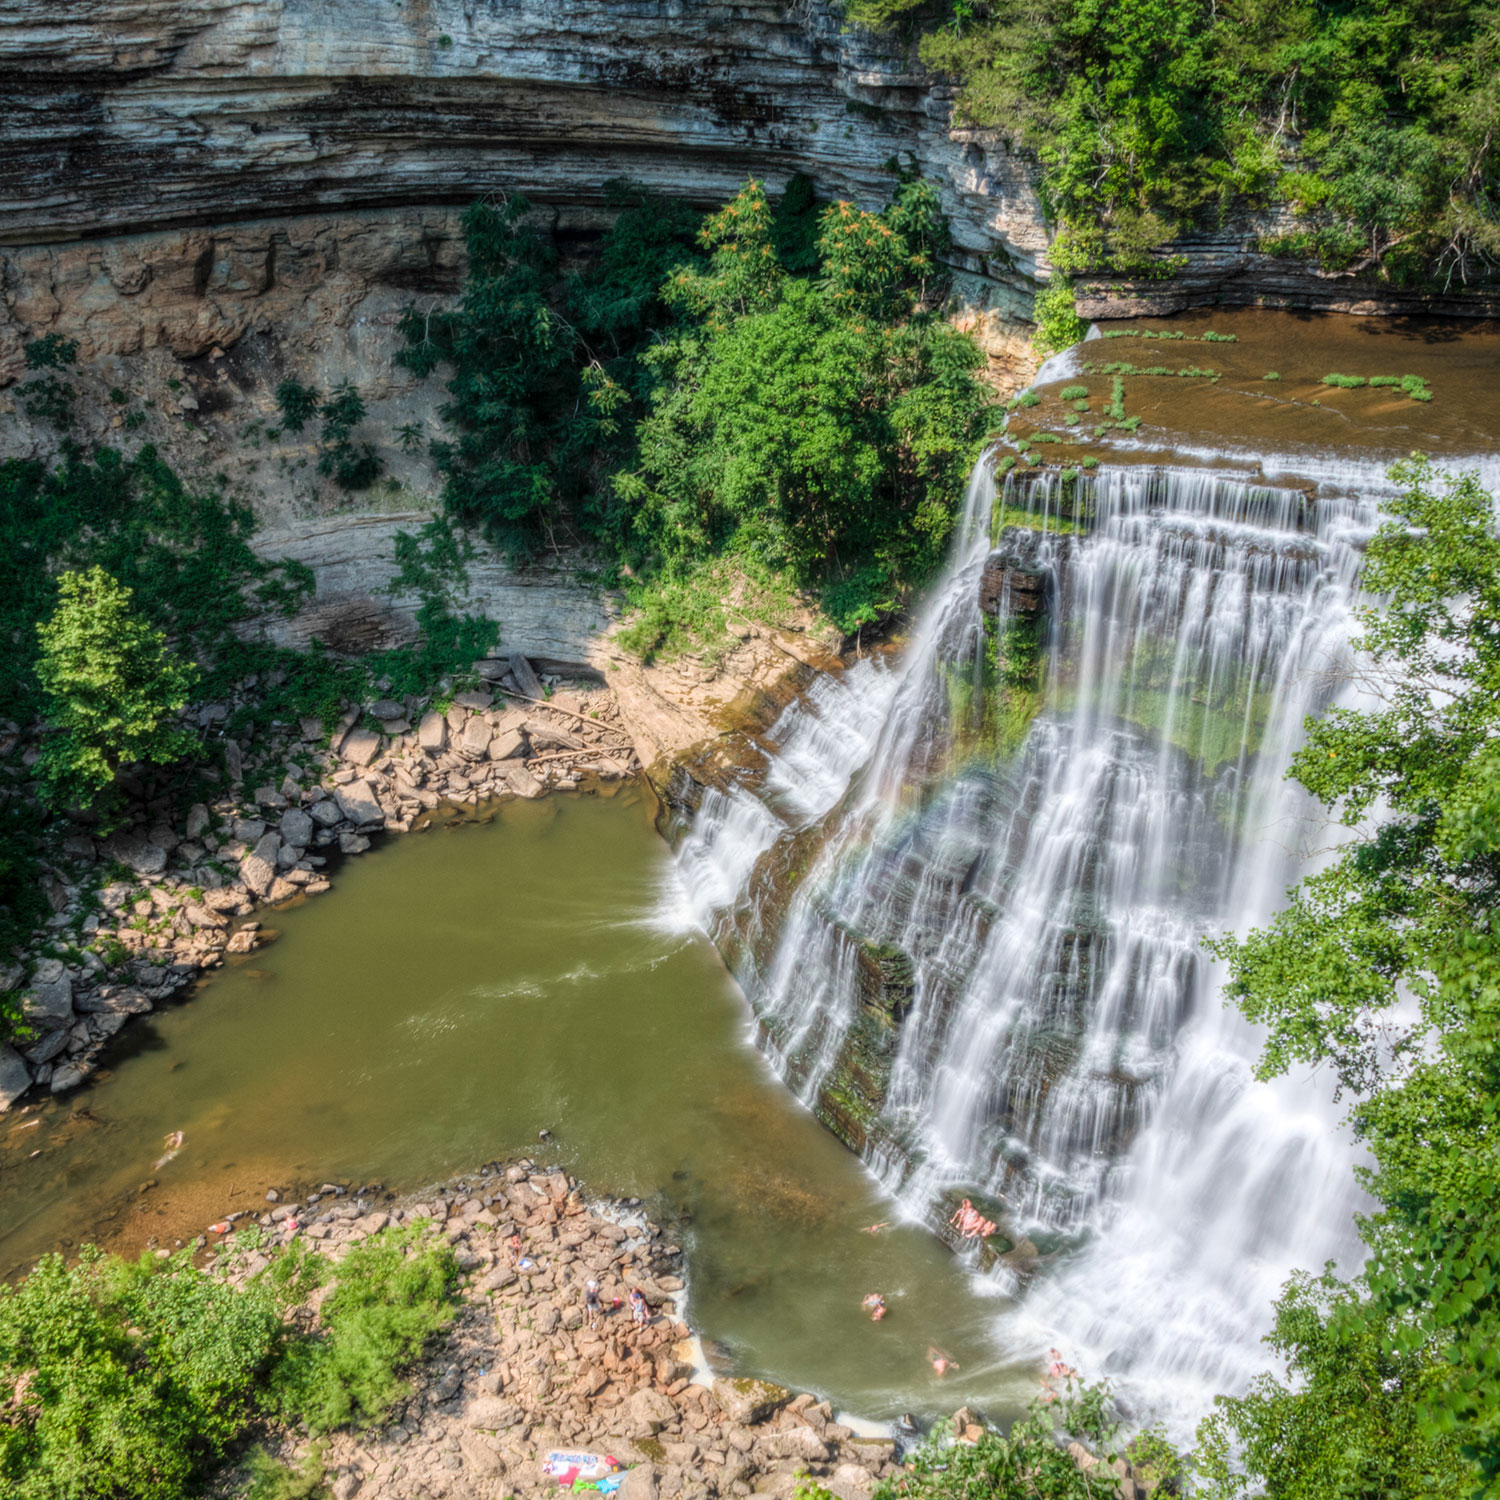 An overhead view of Burgess Falls cascading into the pool below at Burgess Falls State Park near Center Hill Lake.